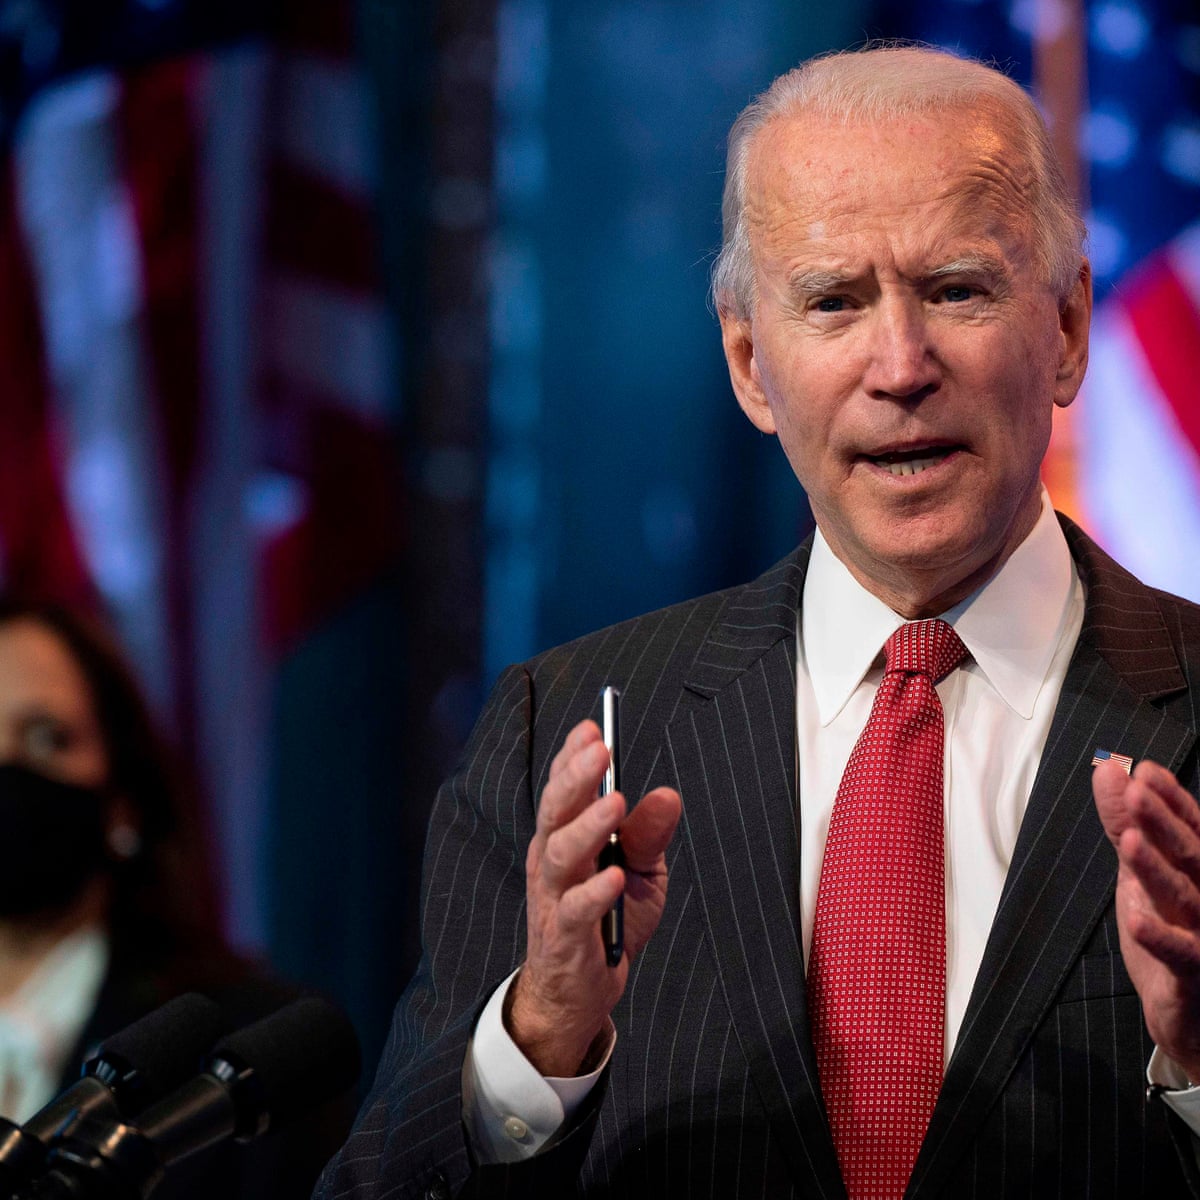 joe biden is from what state - Biden|President|Joe|Years|Trump|Delaware|Vice|Time|Obama|Senate|States|Law|Age|Campaign|Election|Administration|Family|House|Senator|Office|School|Wife|People|Hunter|University|Act|State|Year|Life|Party|Committee|Children|Beau|Daughter|War|Jill|Day|Facts|Americans|Presidency|Joe Biden|United States|Vice President|White House|Law School|President Trump|Foreign Relations Committee|Donald Trump|President Biden|Presidential Campaign|Presidential Election|Democratic Party|Syracuse University|United Nations|Net Worth|Barack Obama|Judiciary Committee|Neilia Hunter|U.S. Senate|Hillary Clinton|New York Times|Obama Administration|Empty Store Shelves|Systemic Racism|Castle County Council|Archmere Academy|U.S. Senator|Vice Presidency|Second Term|Biden Administration